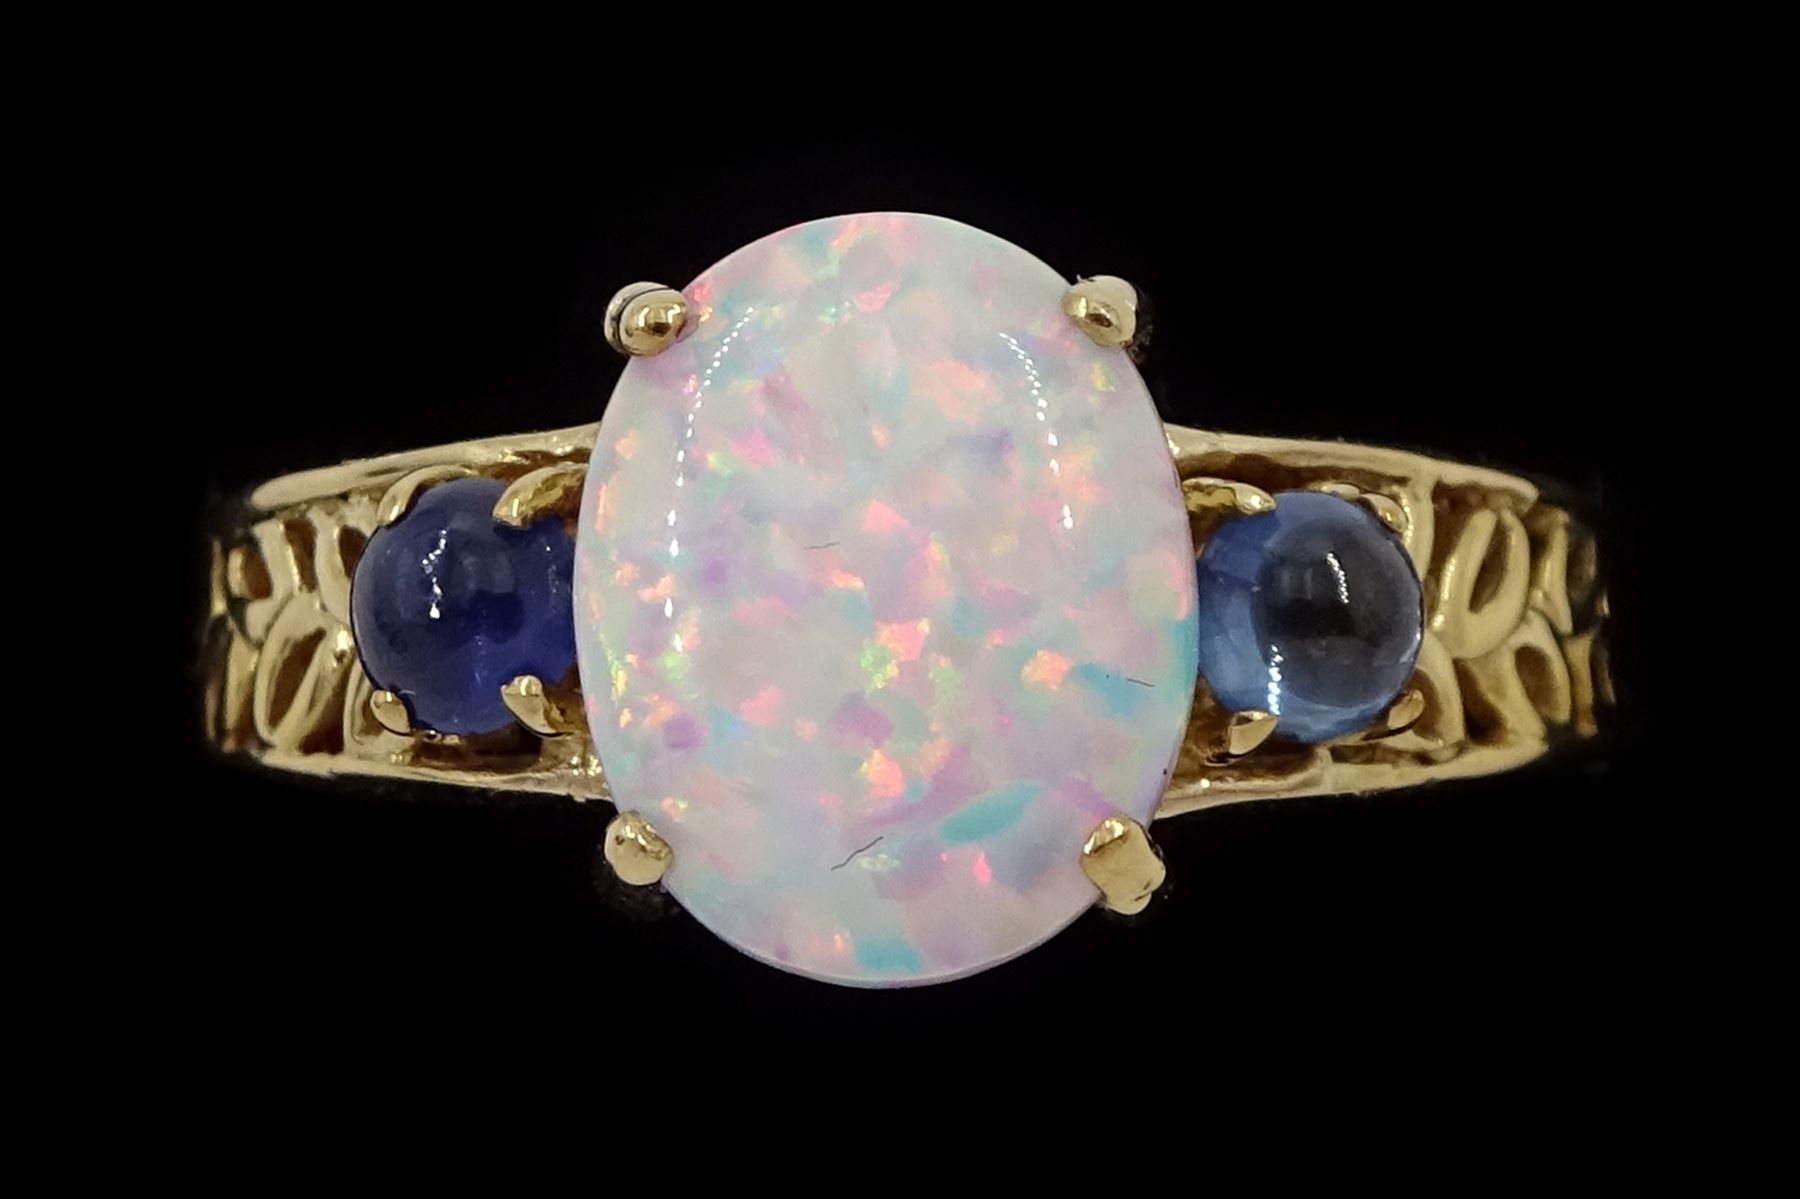 9ct gold three stone opal and sapphire ring